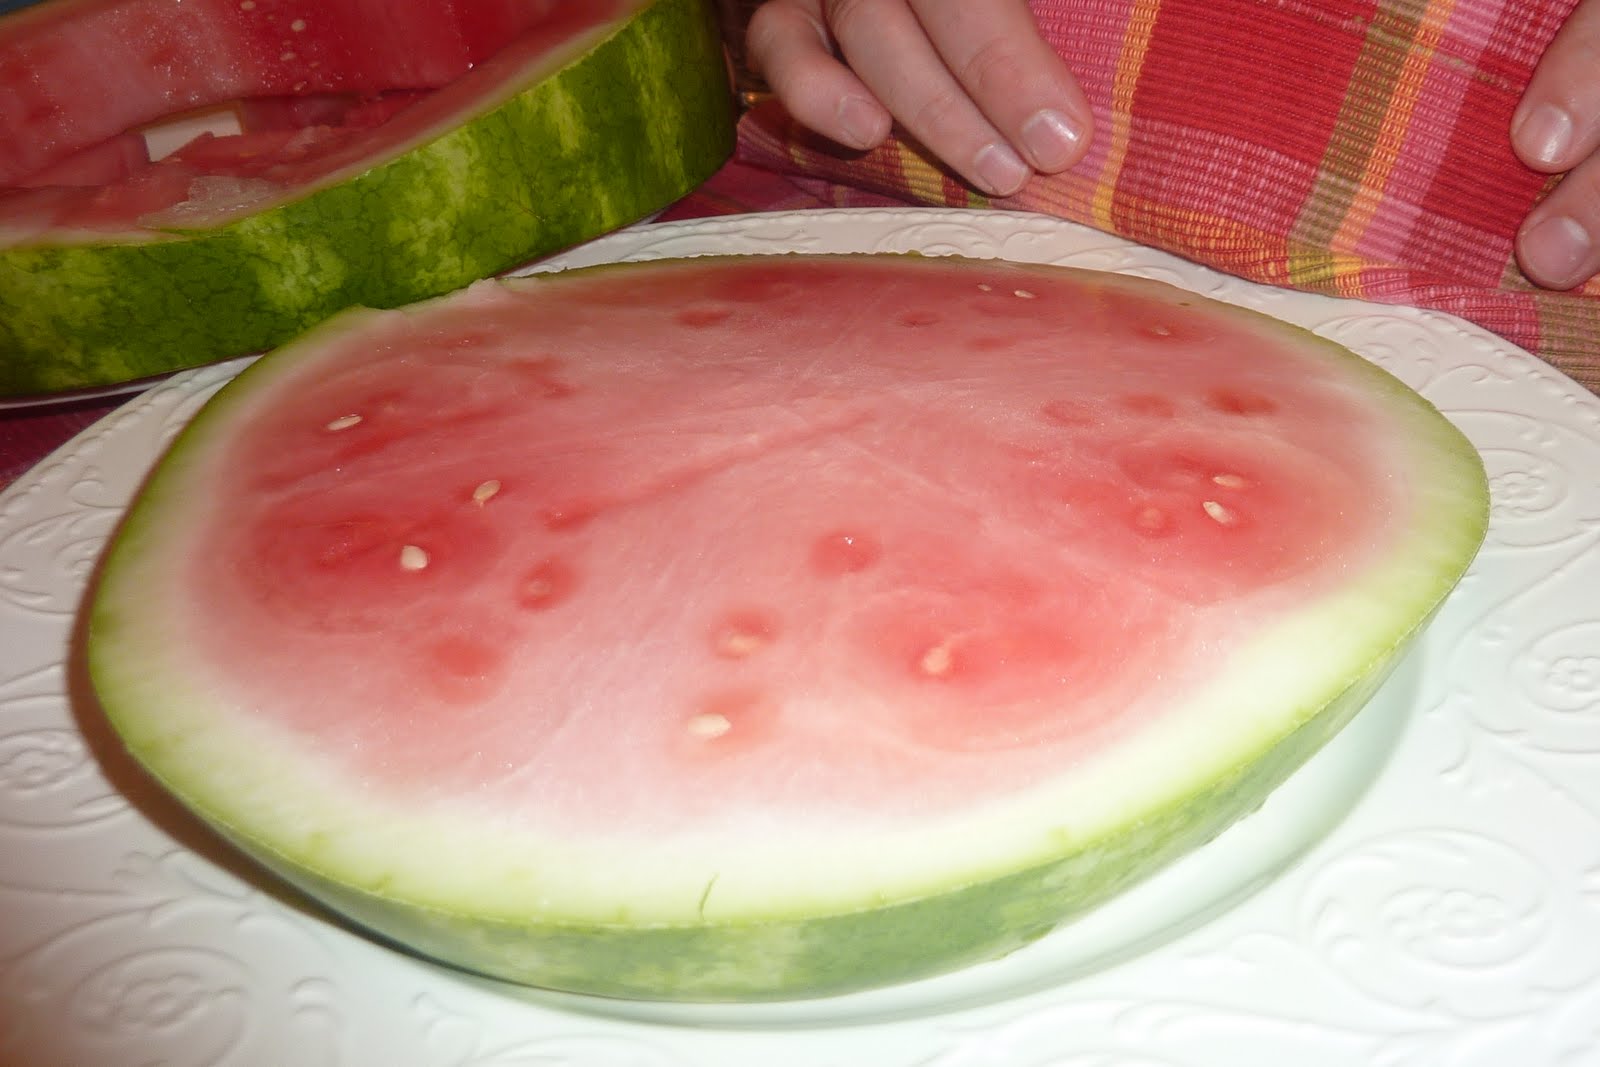 How can you tell if a watermelon is bad?